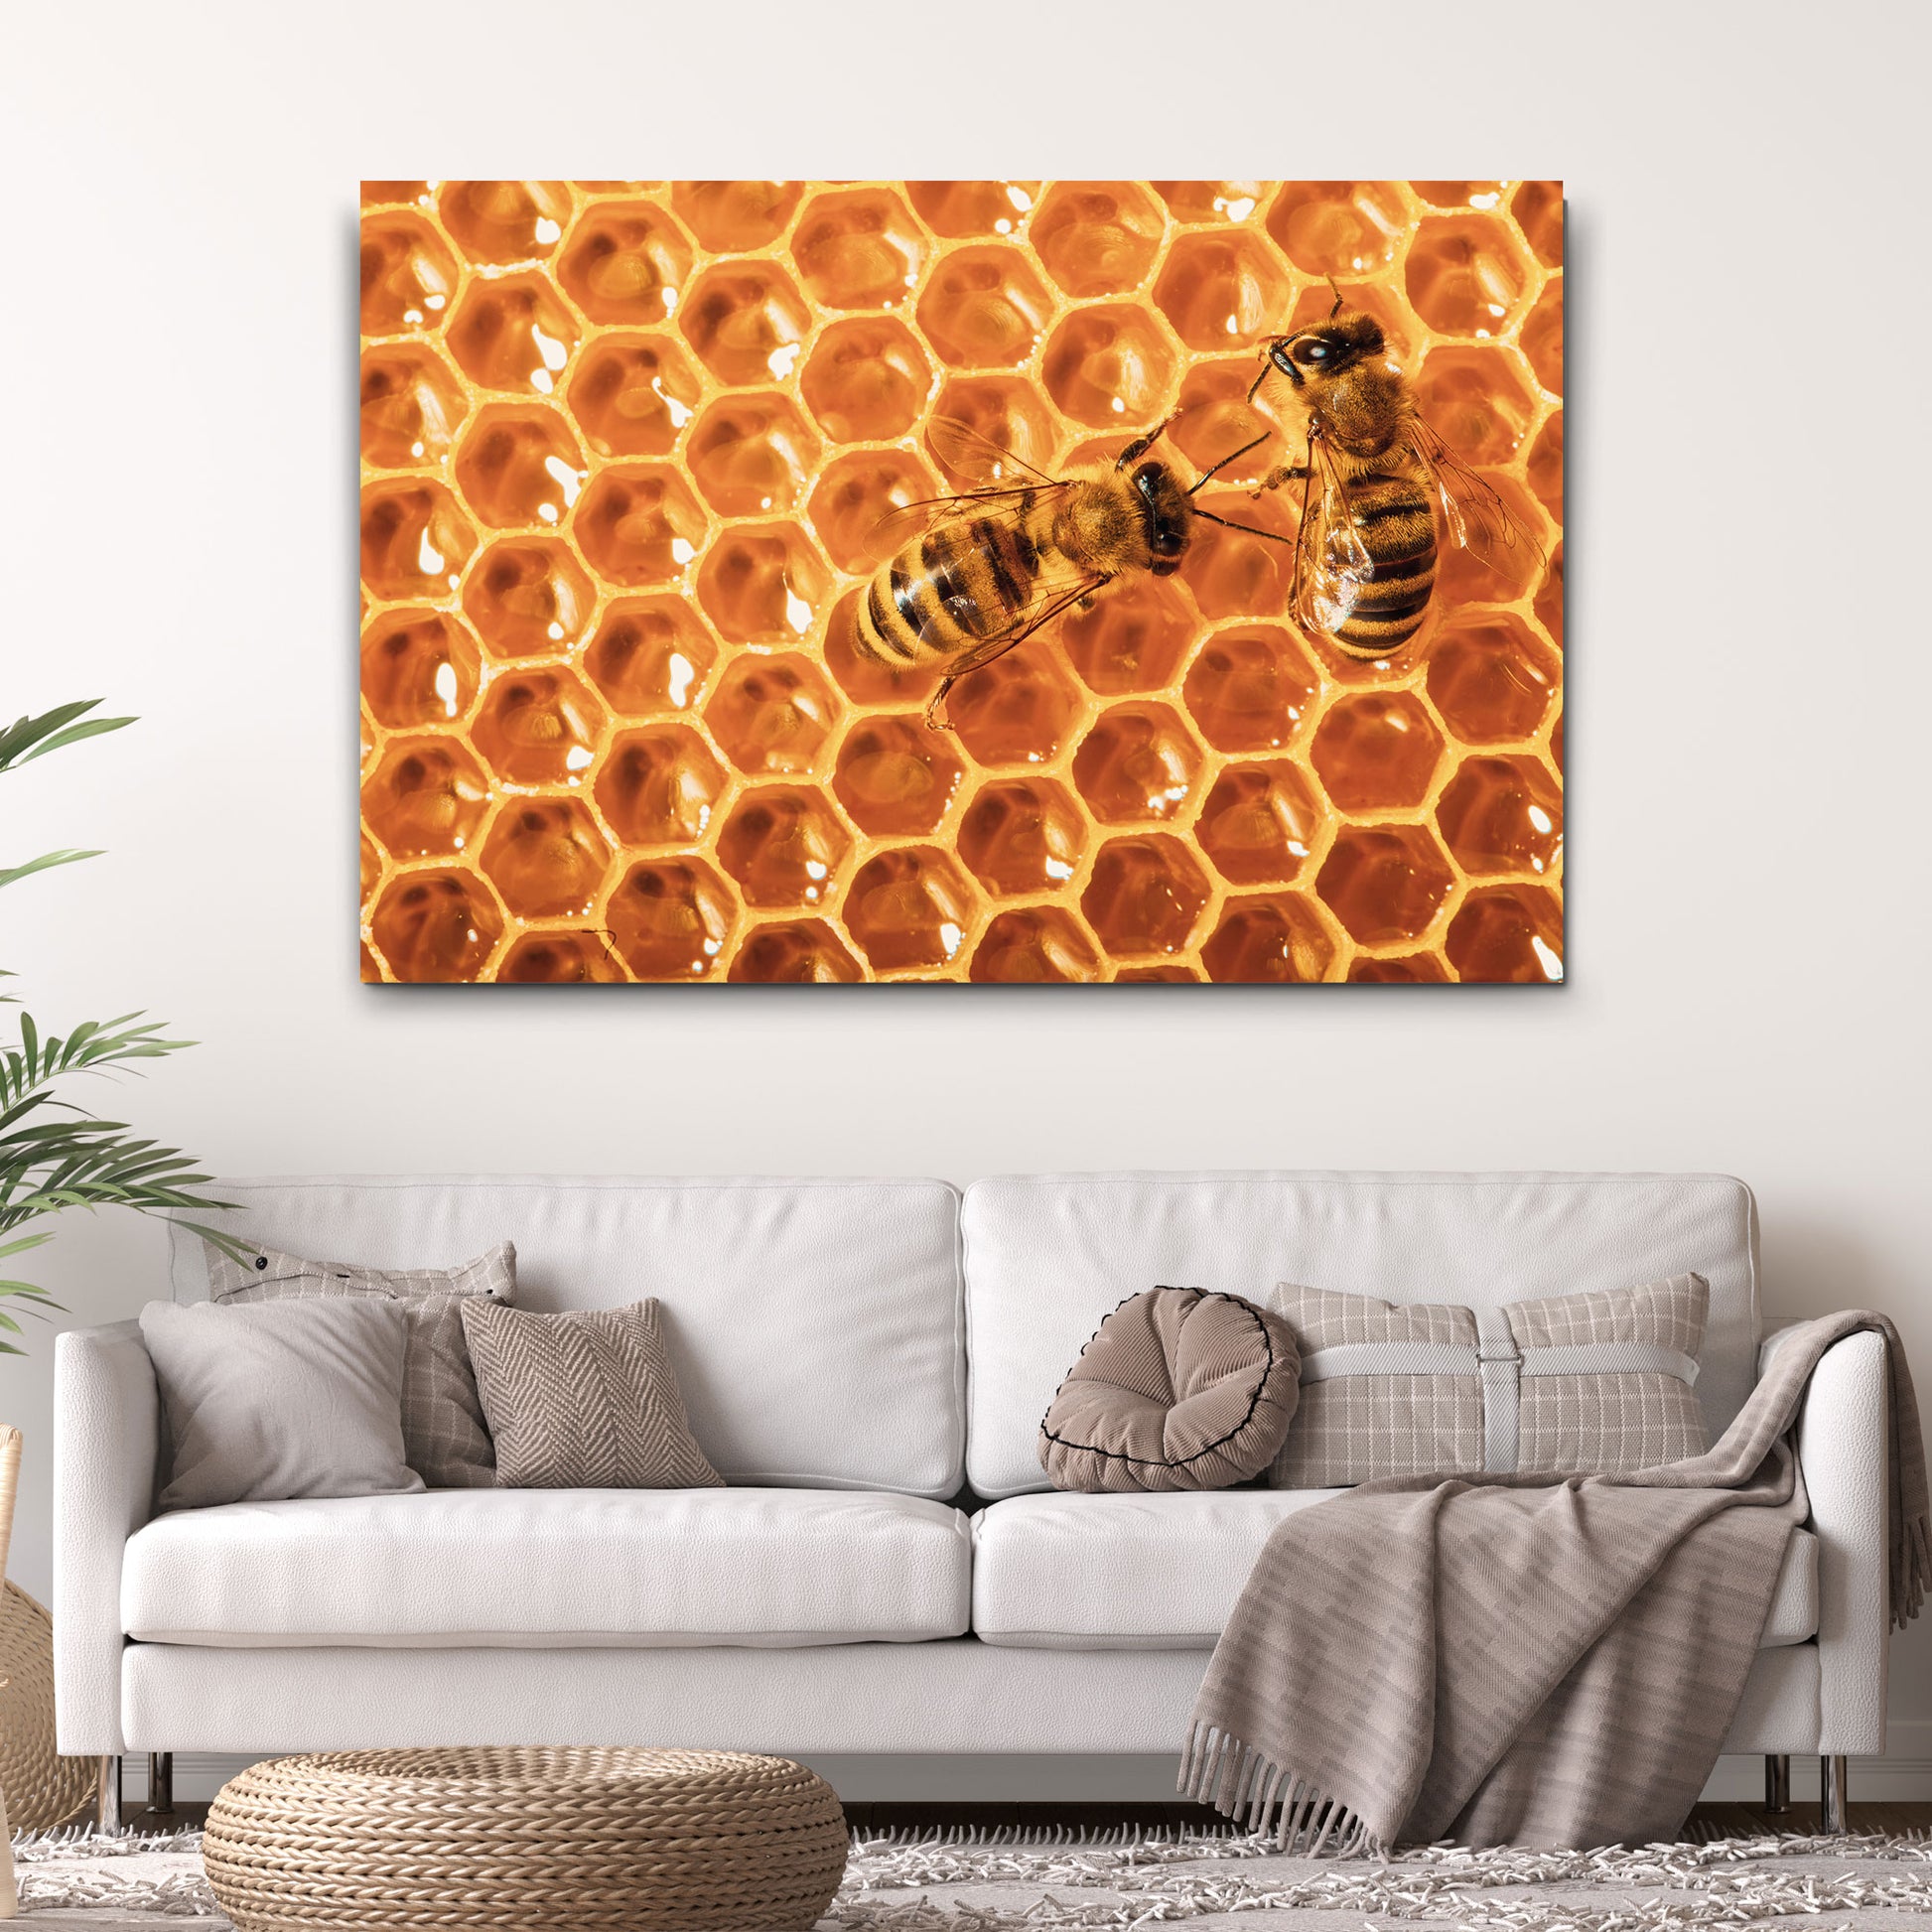 Bees Honeycomb Canvas Wall Art Style 2 - Image by Tailored Canvases